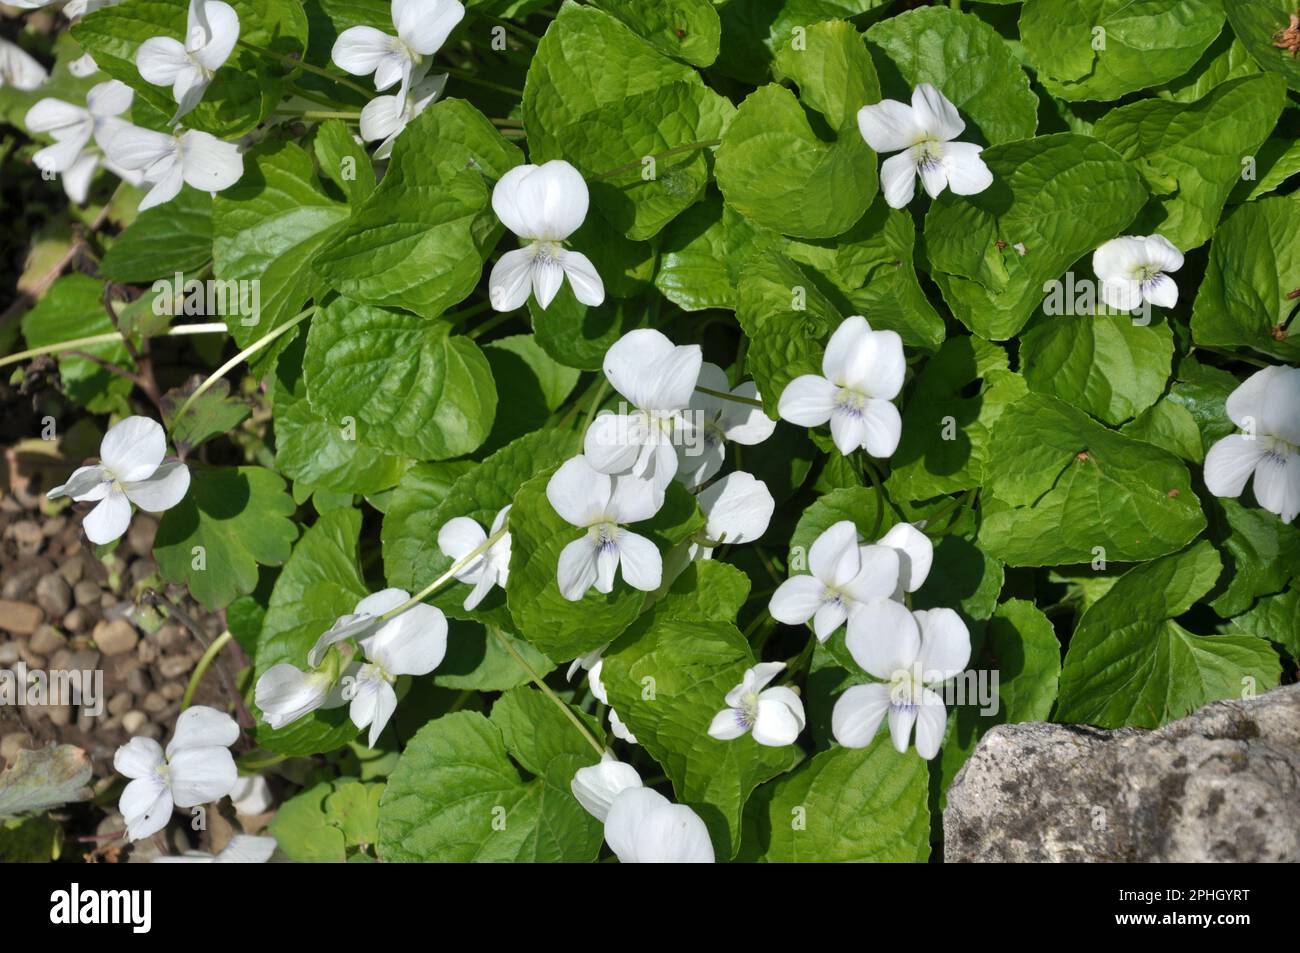 In spring, white violets bloom on the flower bed Stock Photo